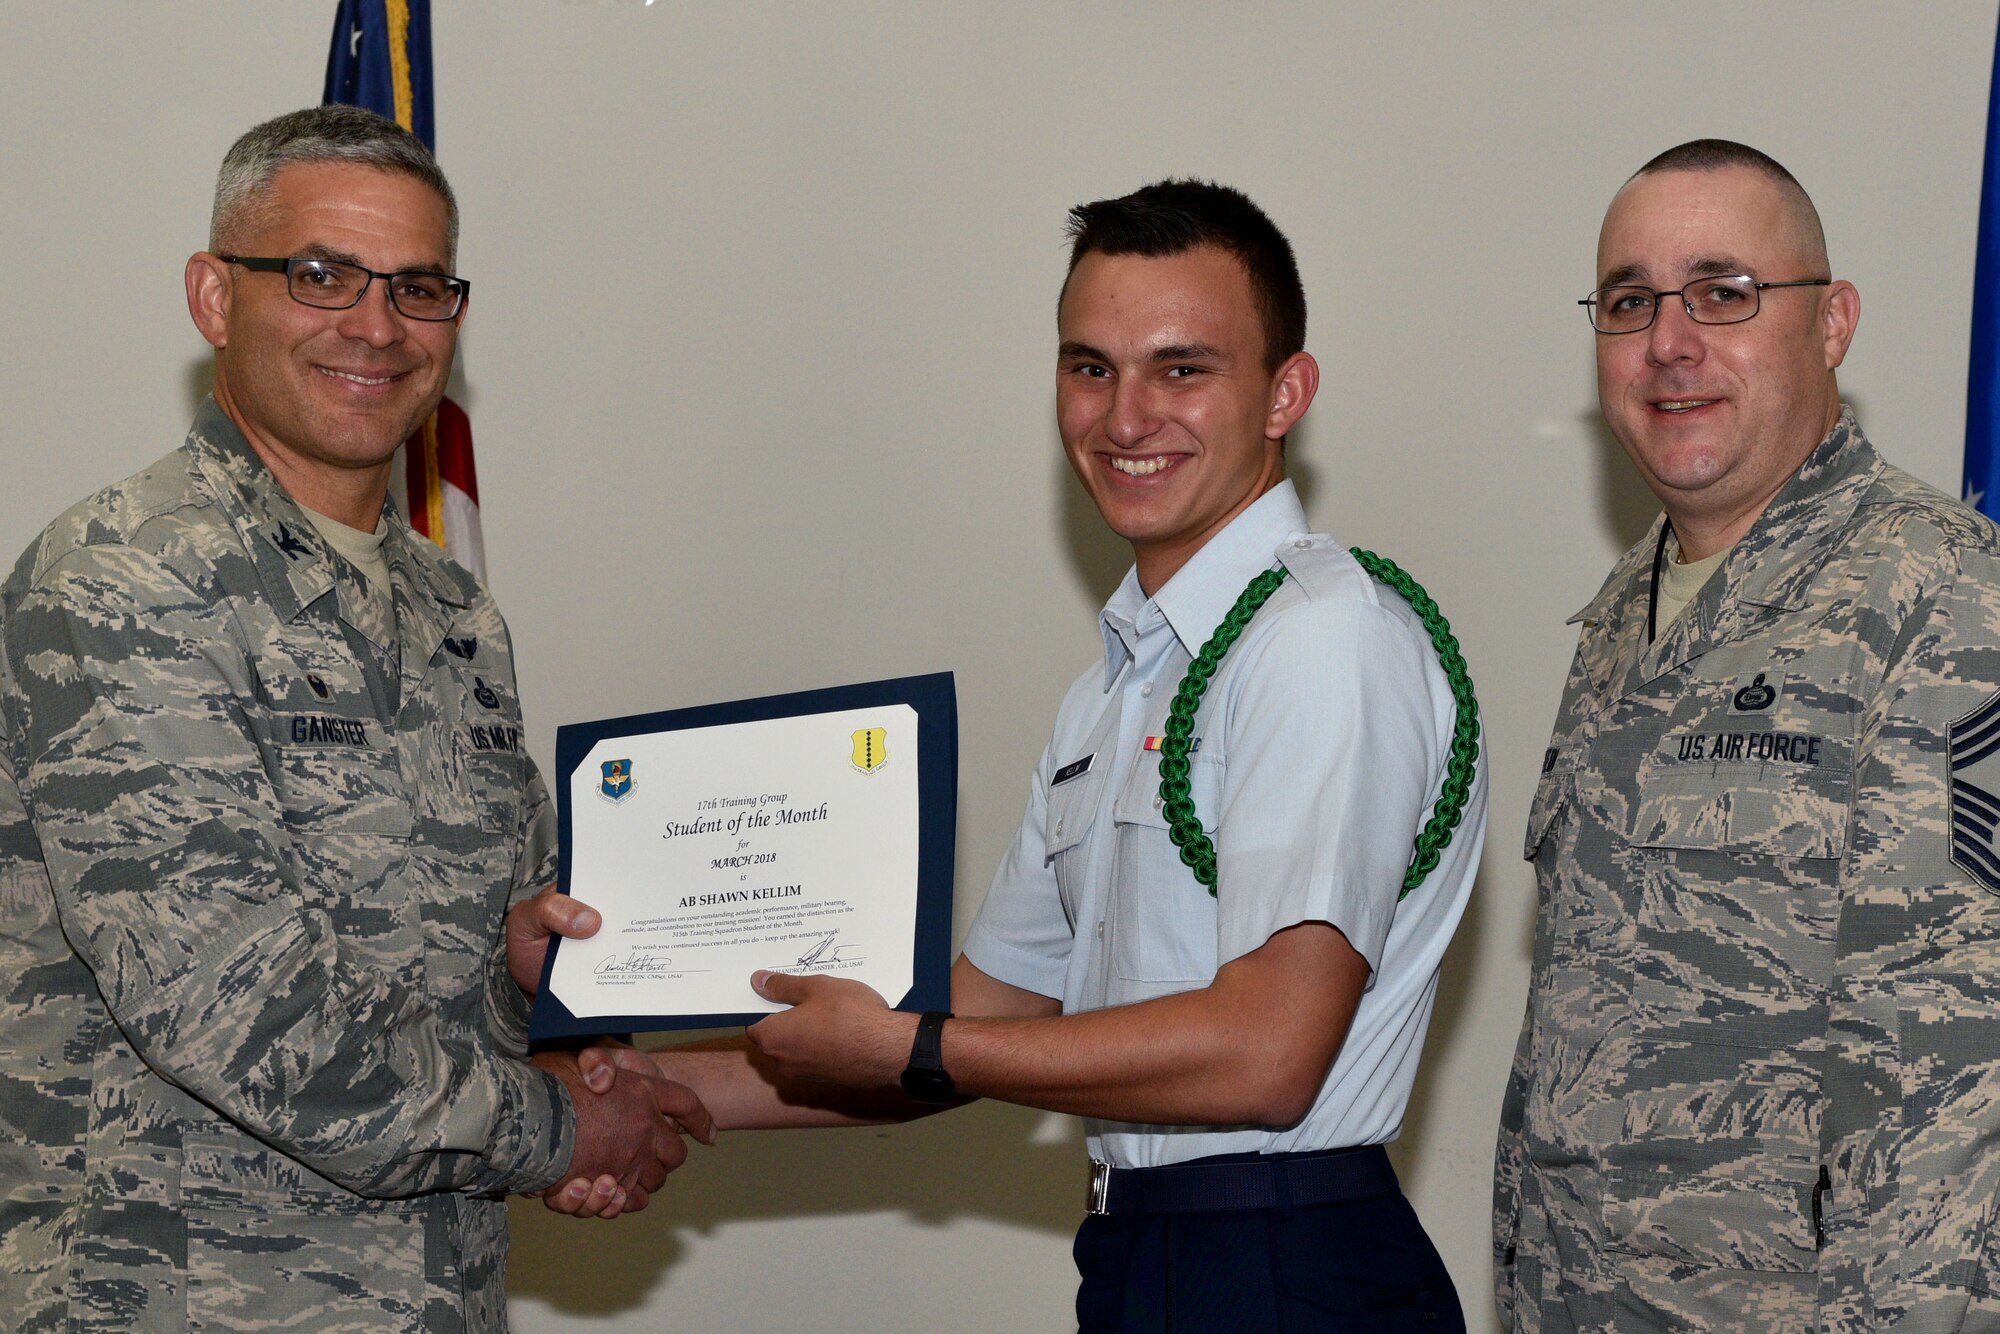 U.S. Air Force Col. Alex Ganster, 17th Training Group commander, and Chief Master Sgt. Daniel Stein, 17th TRG superintendent, present the 315th Training Squadron Student of the Month certificate to Airman Shawn Kellim, 315th TRS trainee, in the Event Center on Goodfellow Air Force Base, Texas, April 6, 2018. The 315th TRS’s vision is to develop combat-ready intelligence, surveillance and reconnaissance professionals and promote an innovative squadron culture and identity unmatched across the U.S. Air Force. (U.S. Air Force photo by Senior Airman Randall Moose/Released)